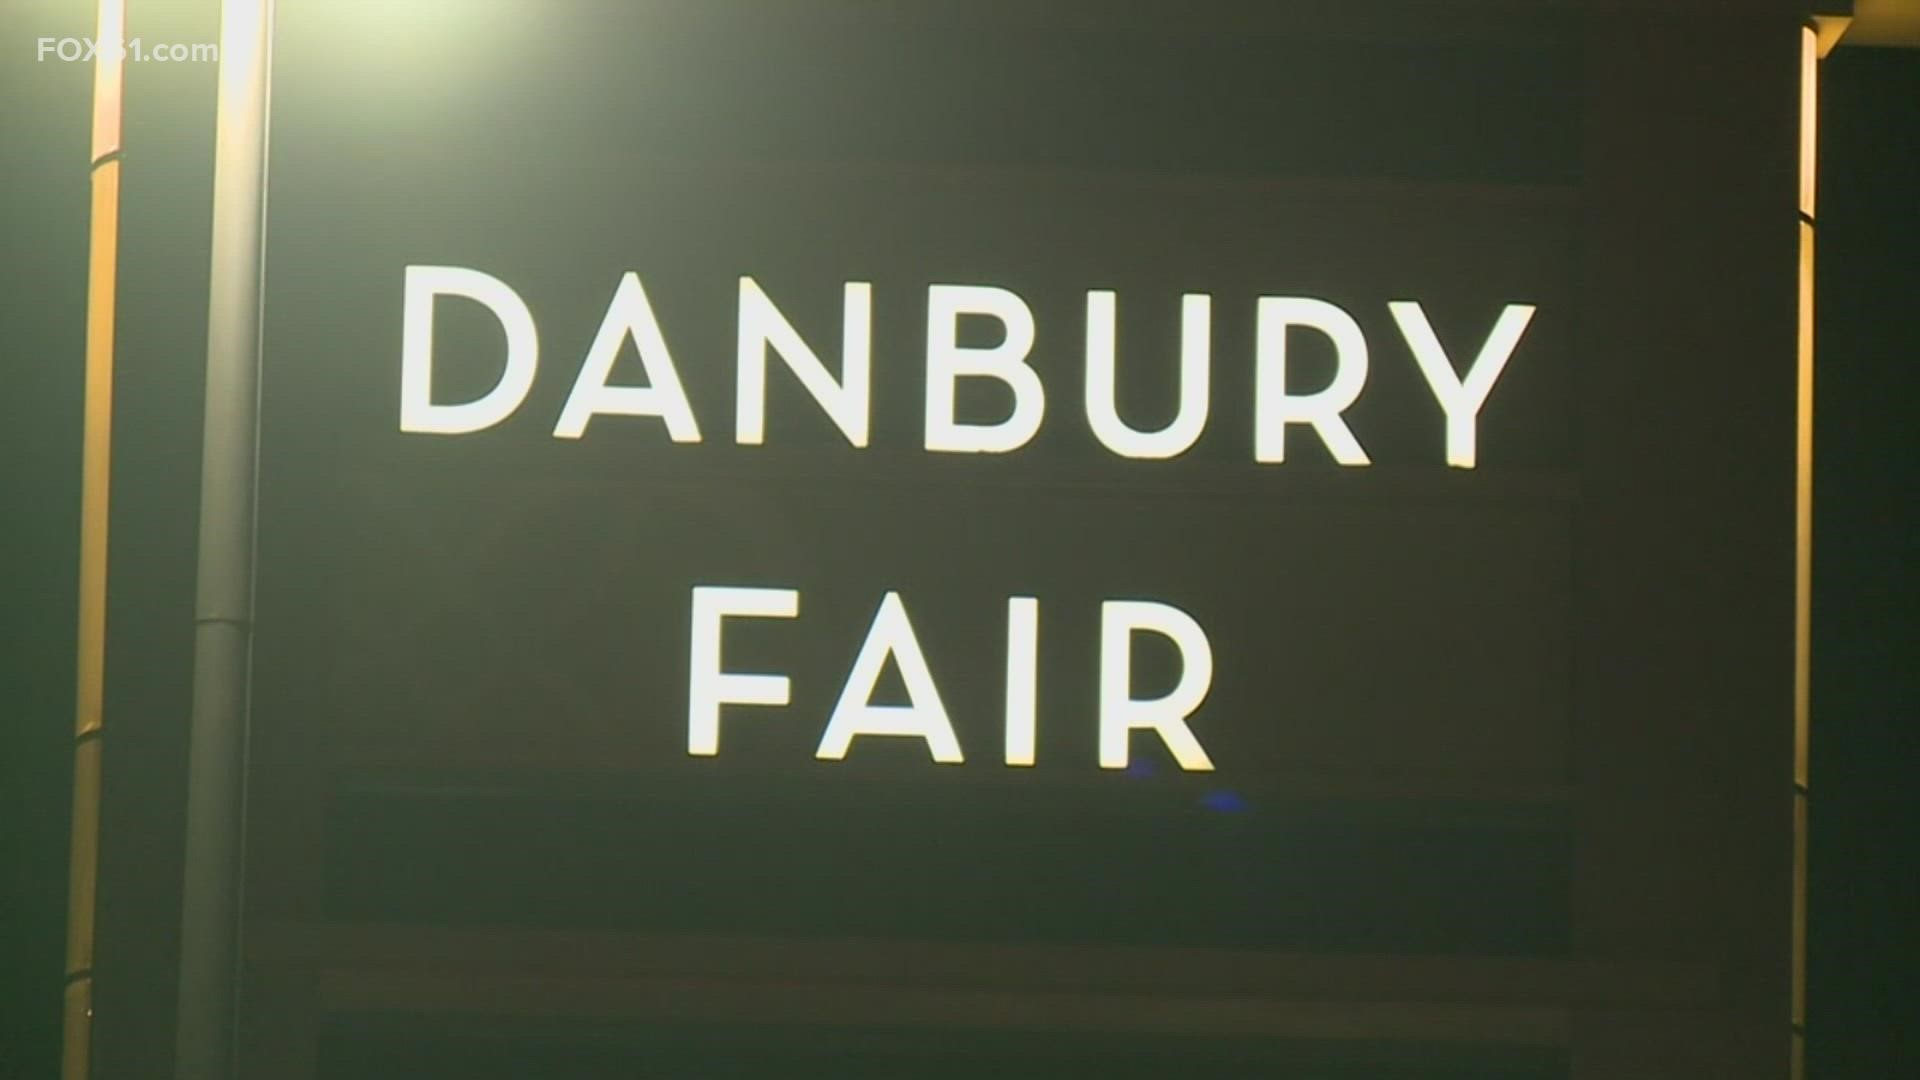 15-Year-Old Shot at Danbury Fair Mall Is in Stable Condition – NBC